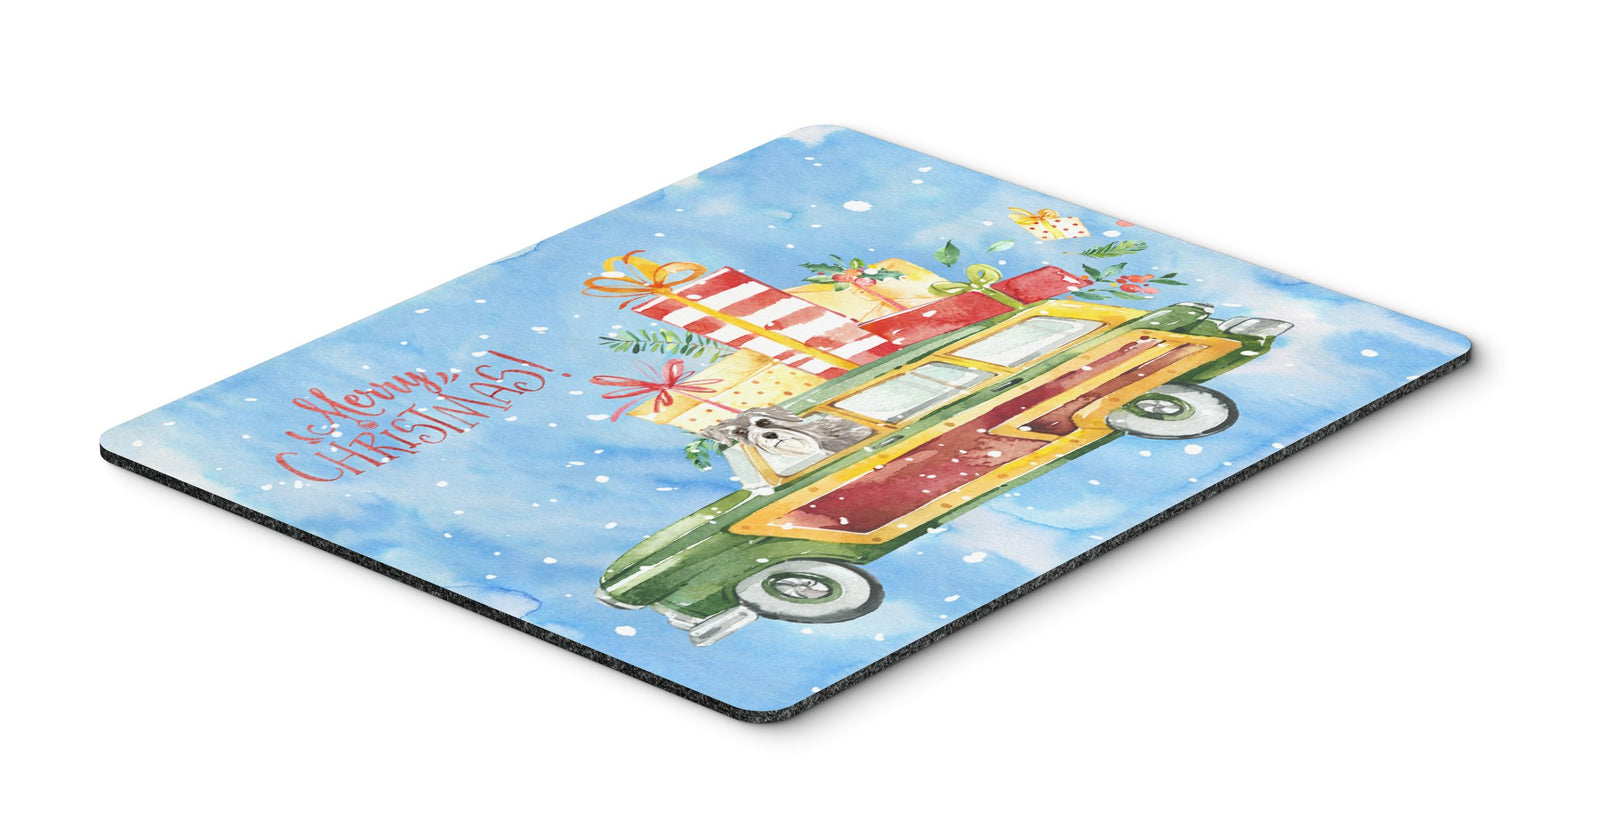 Merry Christmas Schnauzer #2 Mouse Pad, Hot Pad or Trivet CK2419MP by Caroline's Treasures